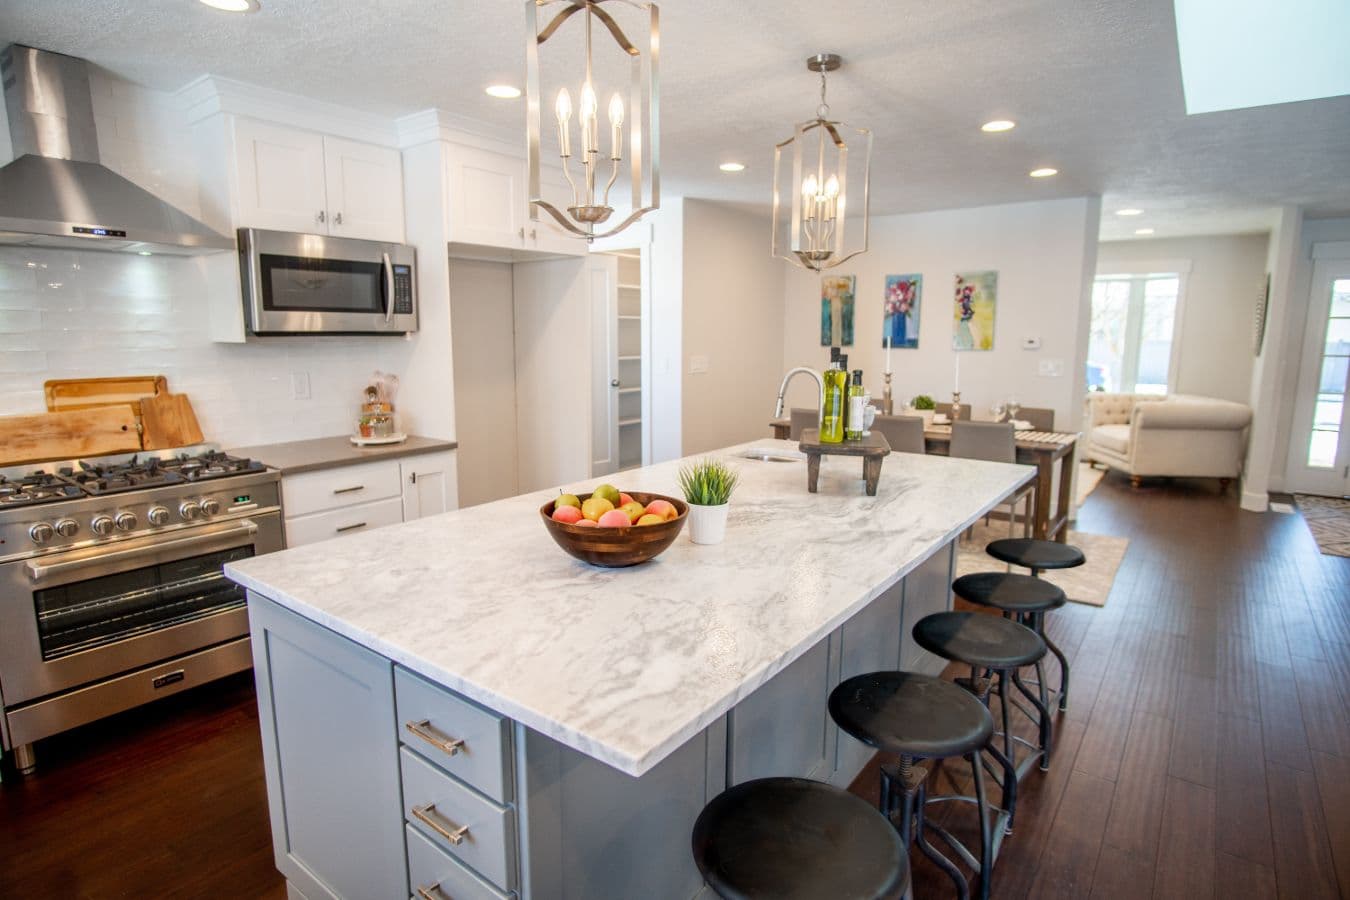 frantz kitchen remodeling large white kitchen island with gold hanging chandeliers and black bar stools